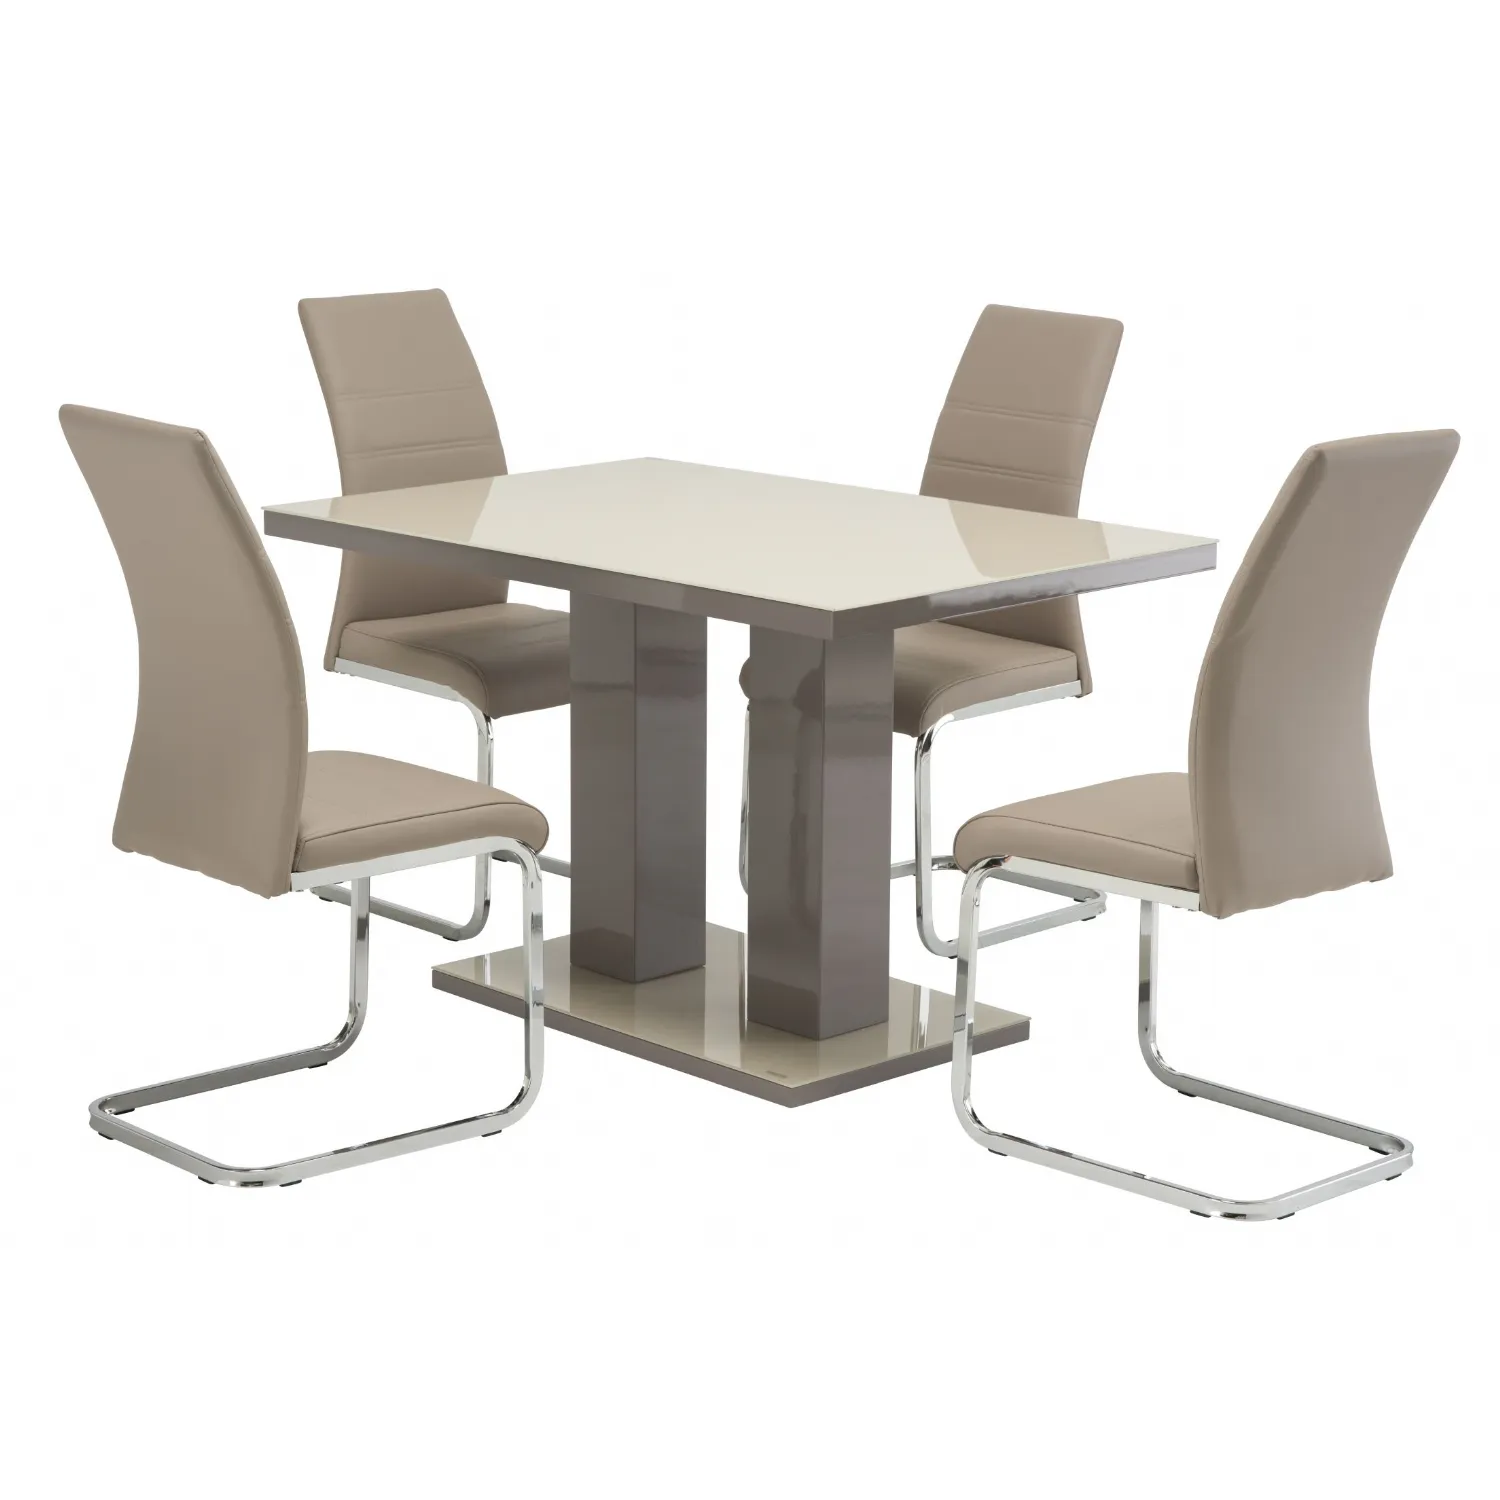 Latte Gloss Glass Top 120cm Dining Table and 4 Chairs Set